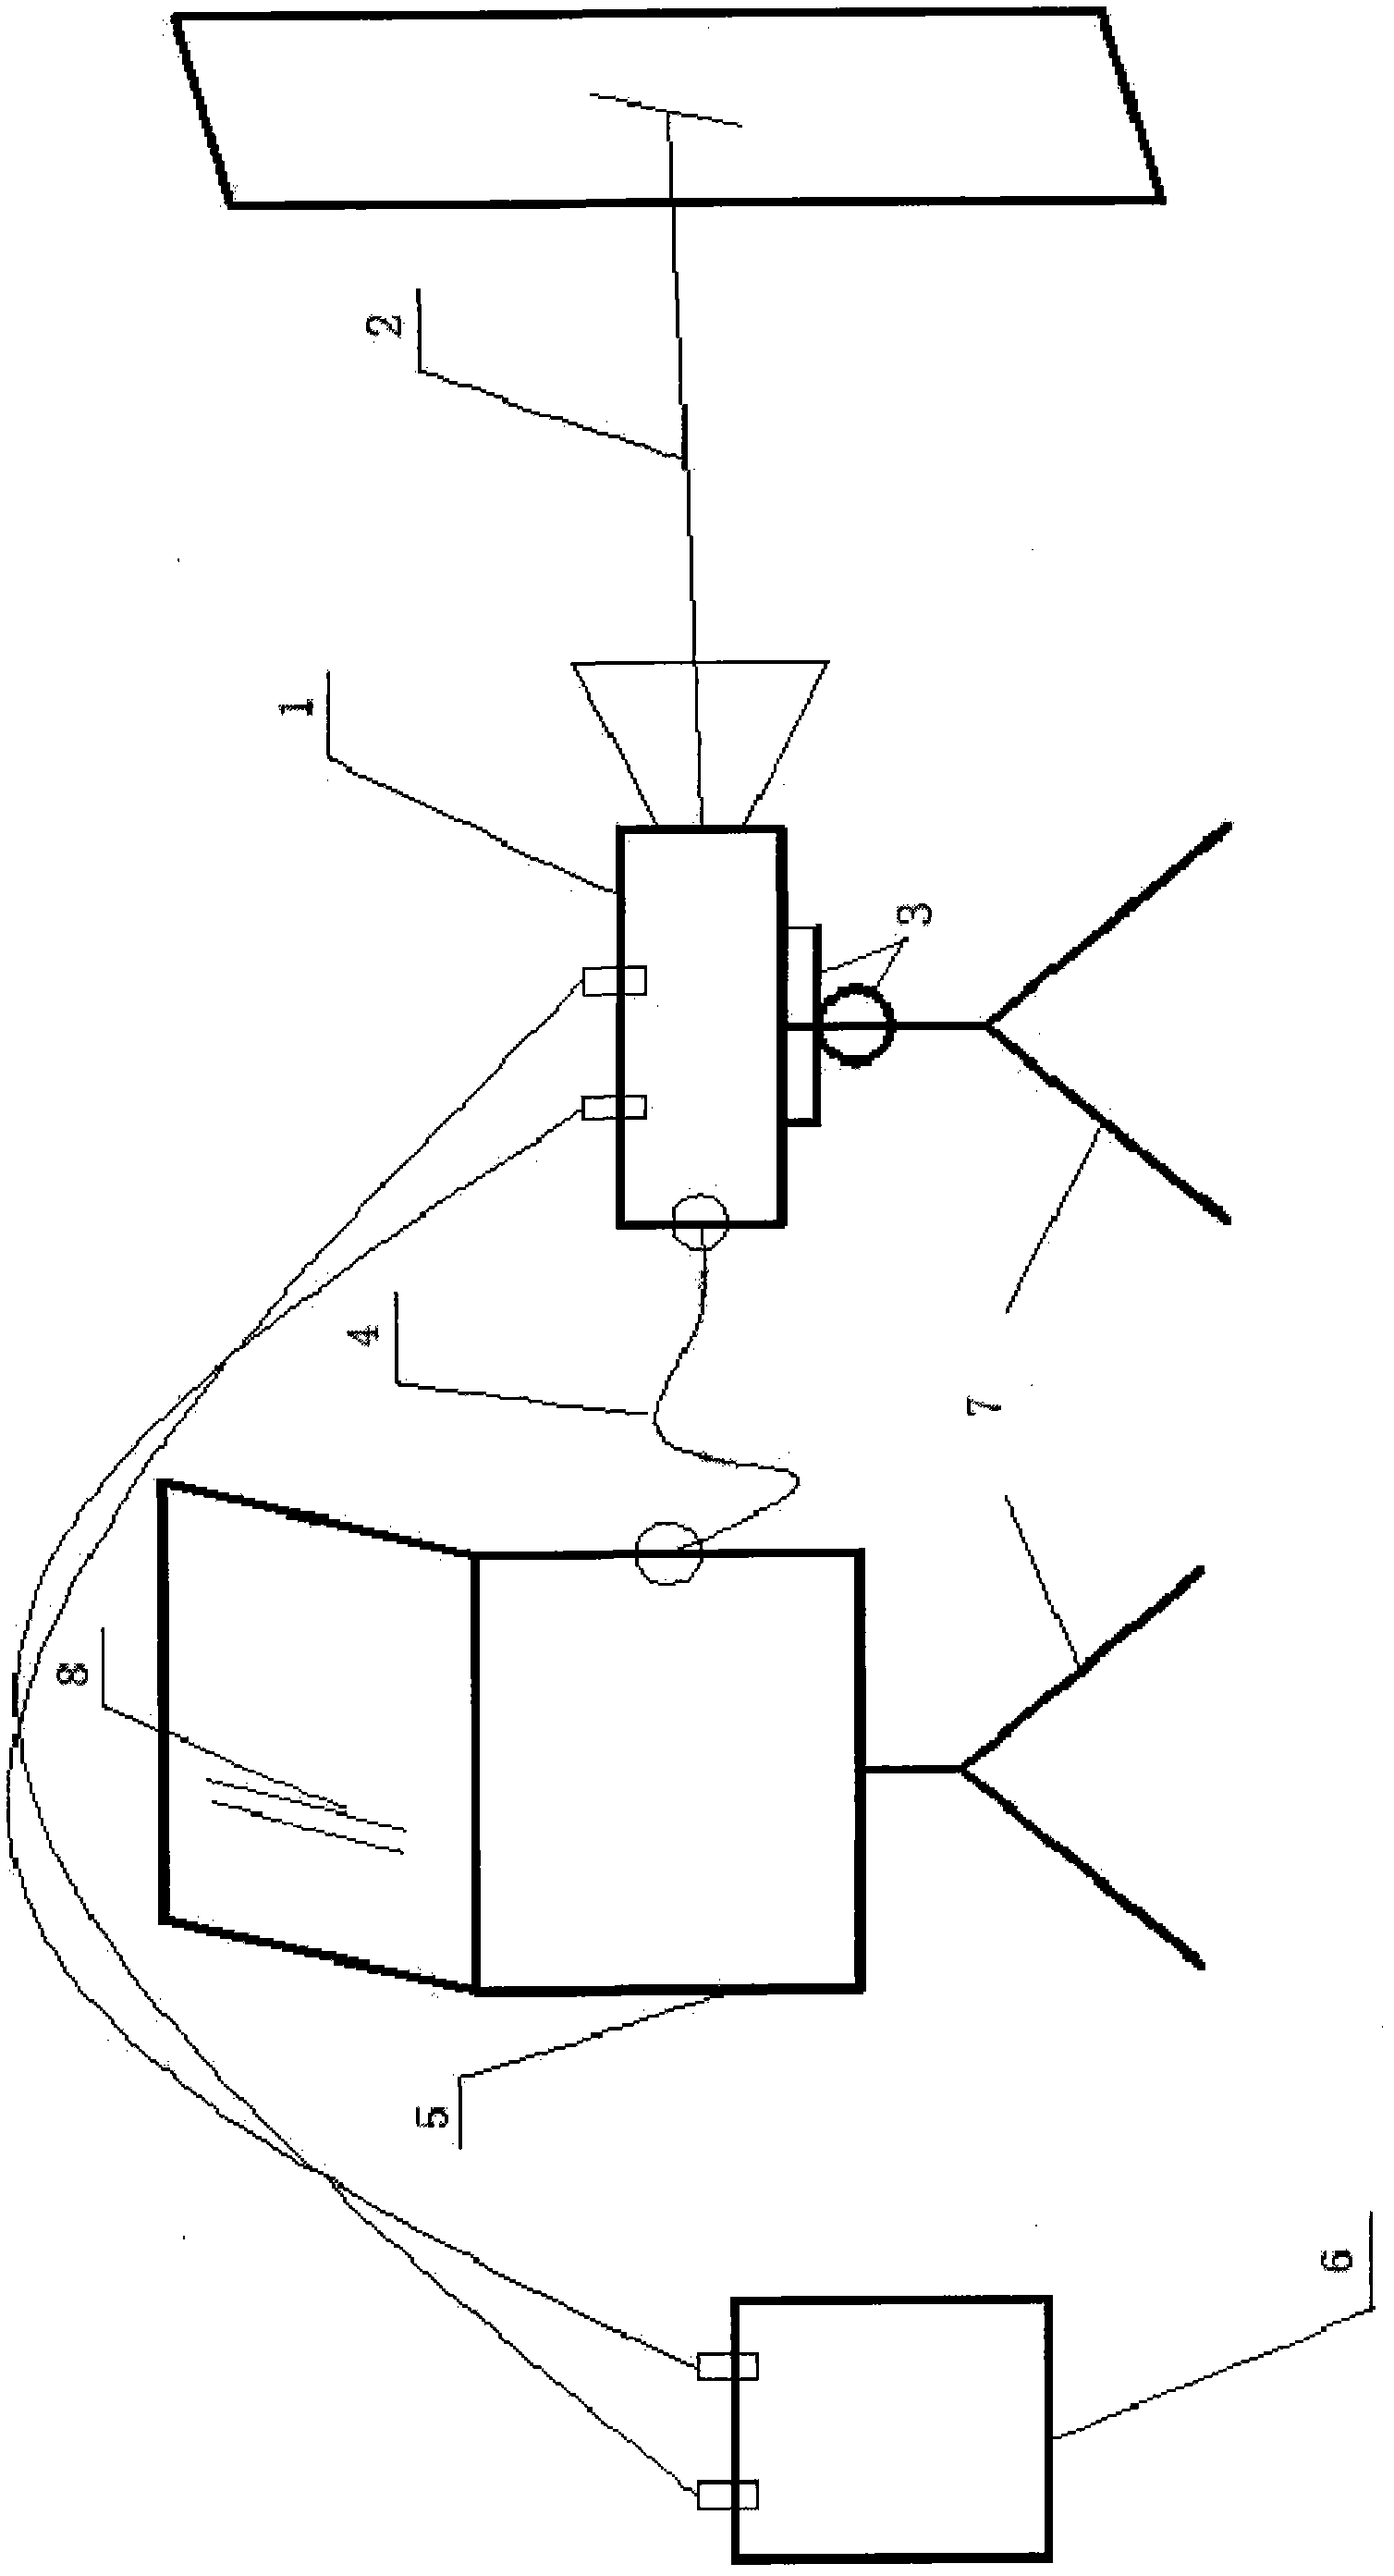 System for carrying out image acquisition and analysis on crack defects of bridge structure